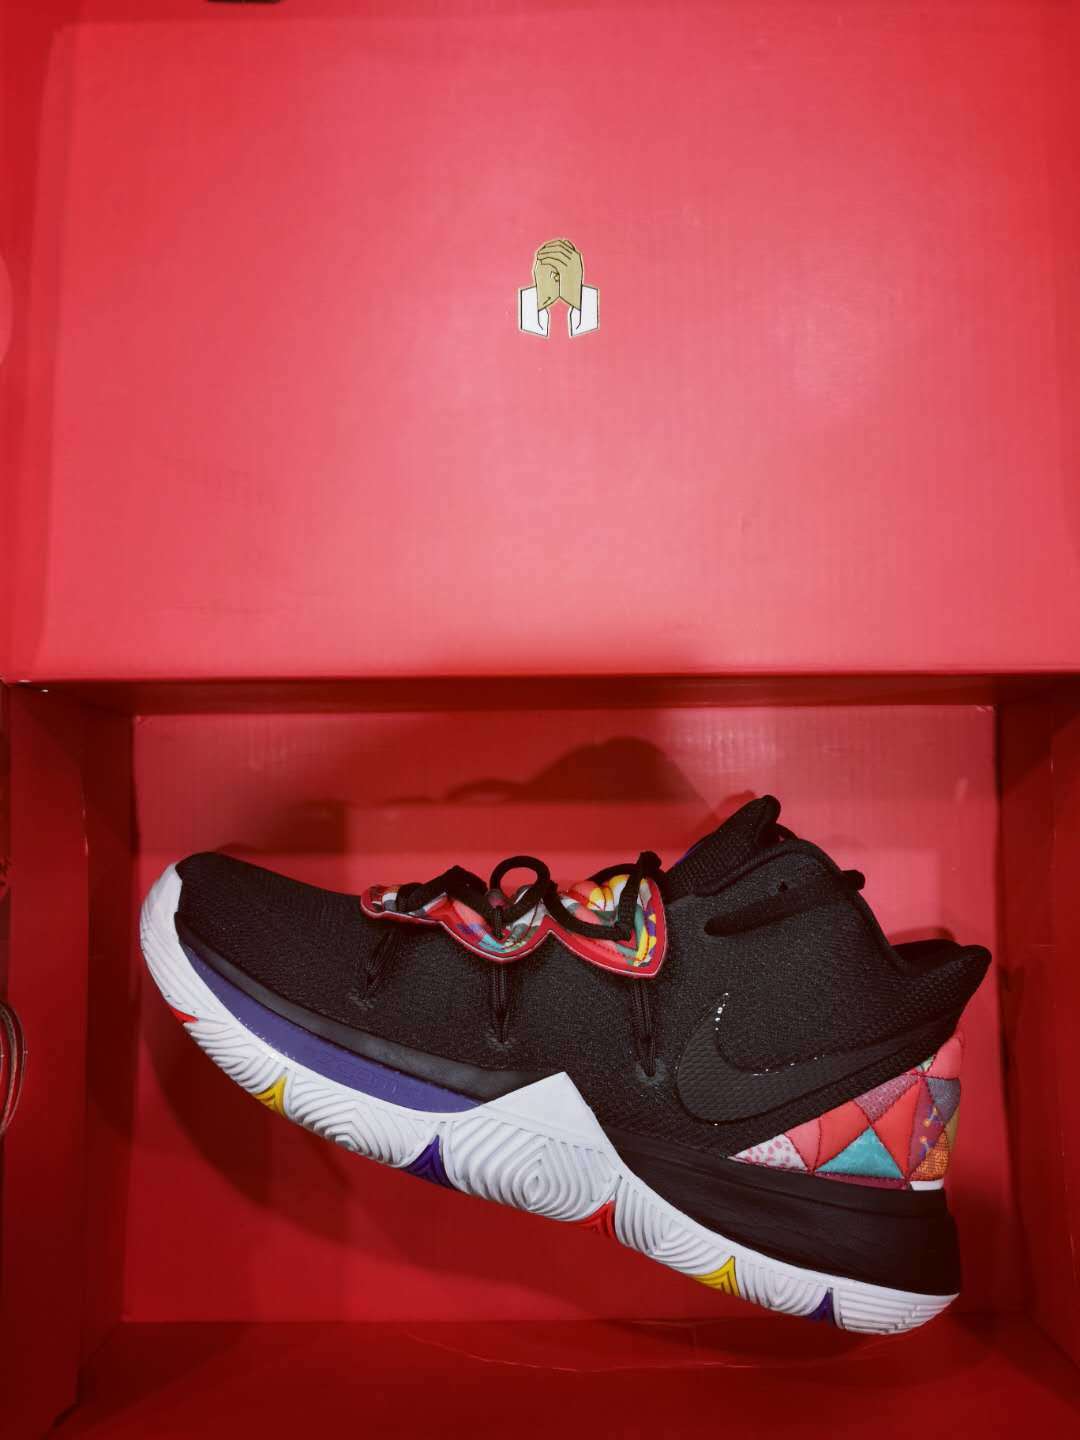 kyrie irving shoe box